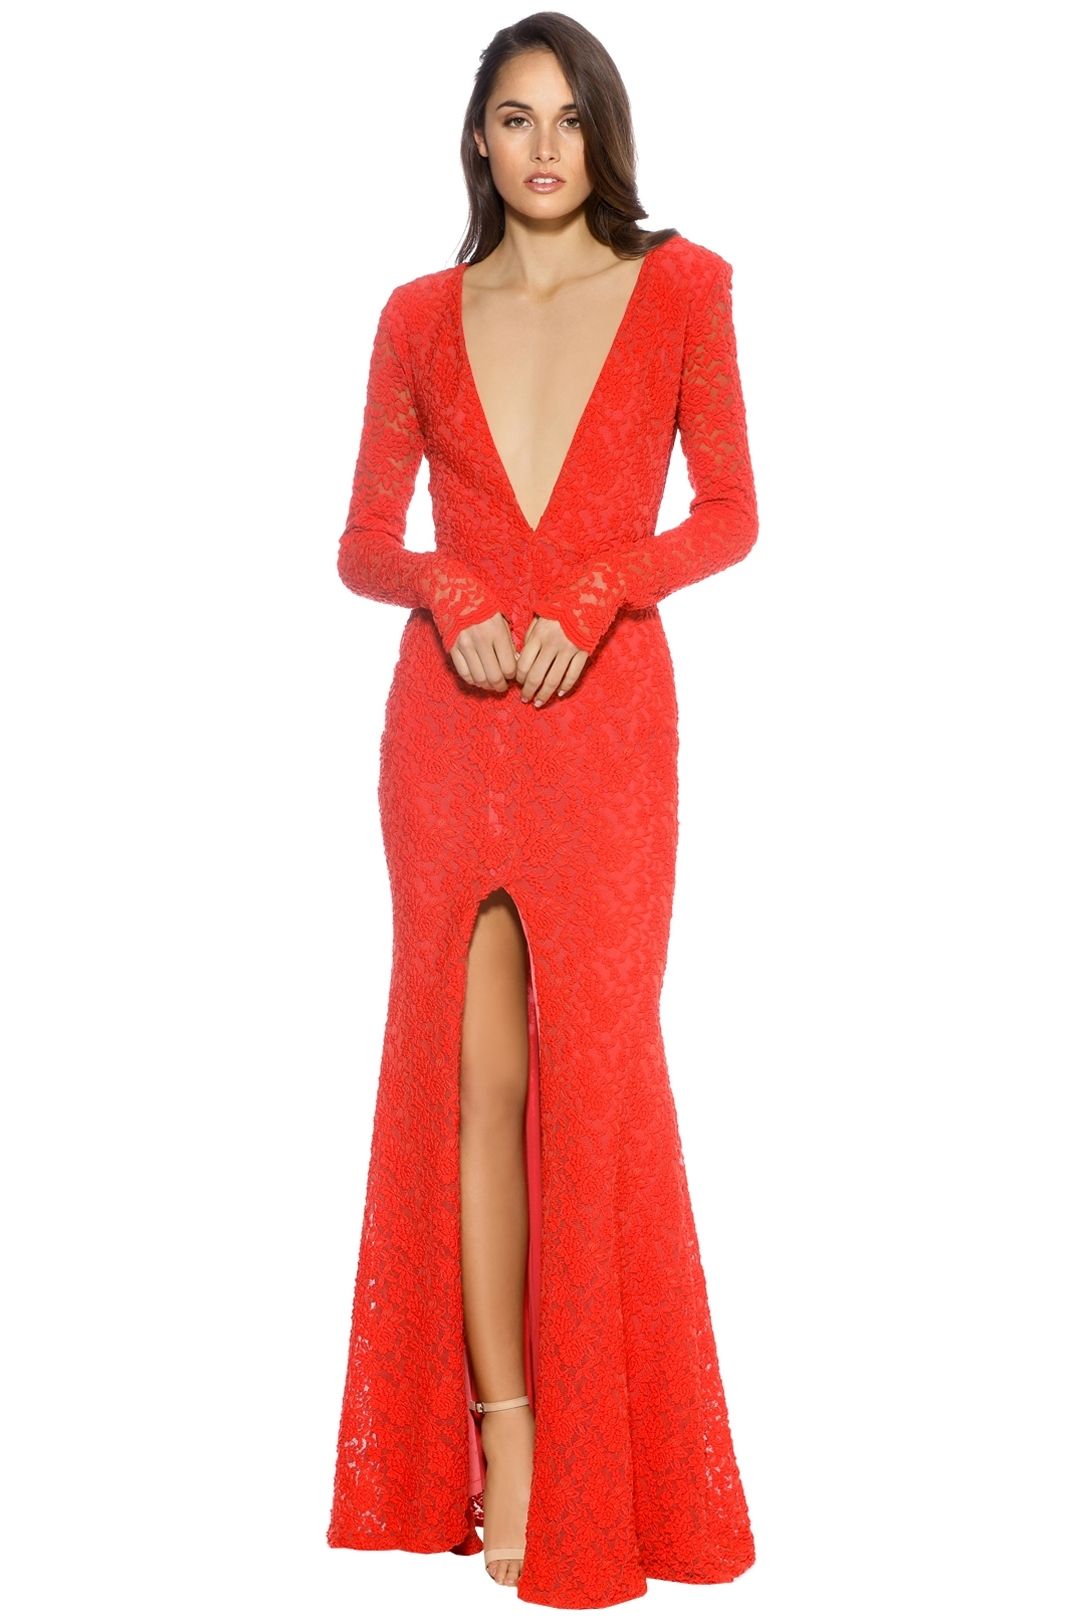 Ae'lkemi - V Plunge Red Long Sleeve Gown - Red - Front